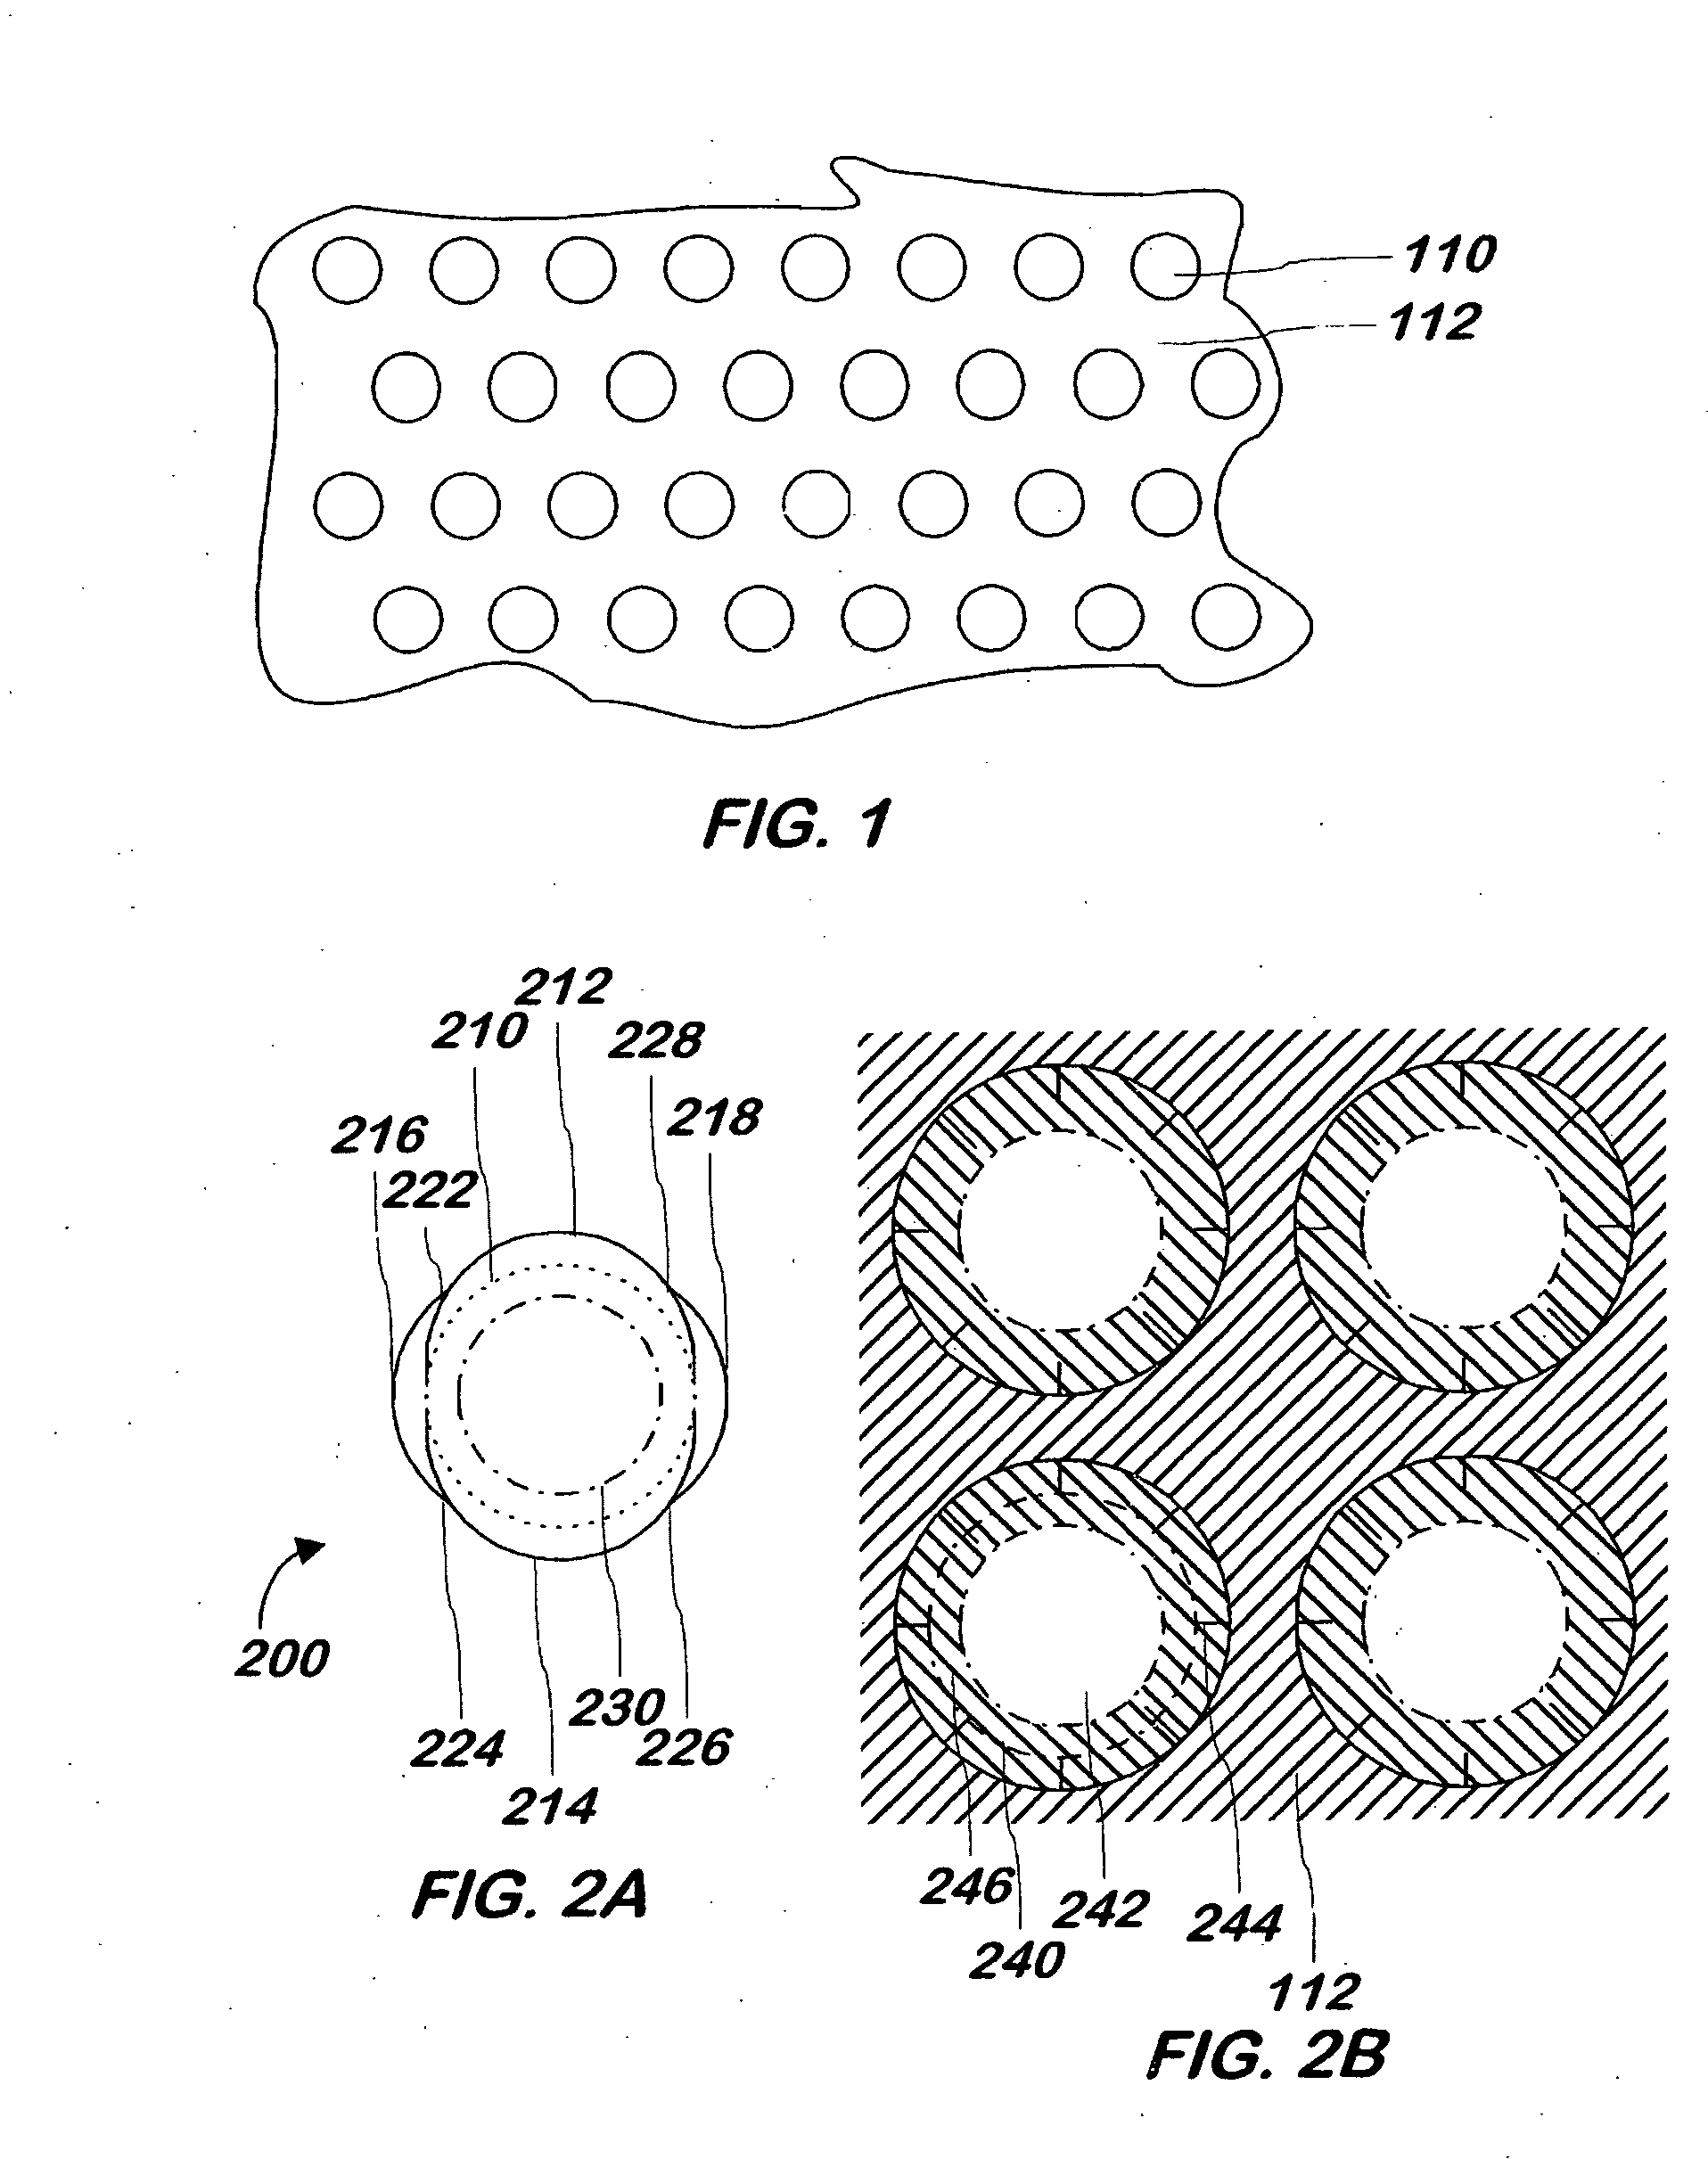 Battery mounting and cooling system